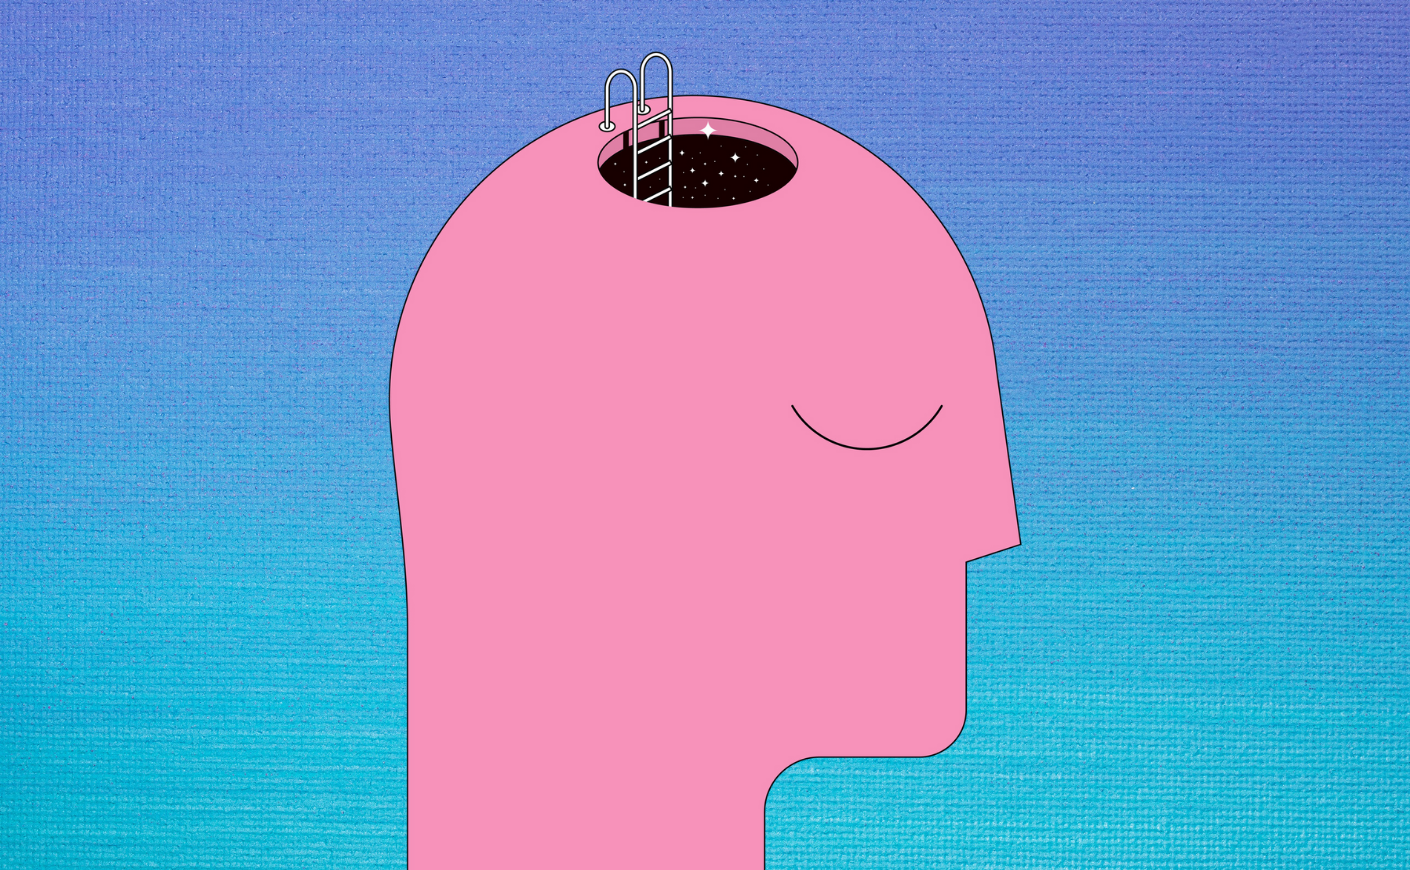 Illustration of a head with a ladder inside to explore the brain